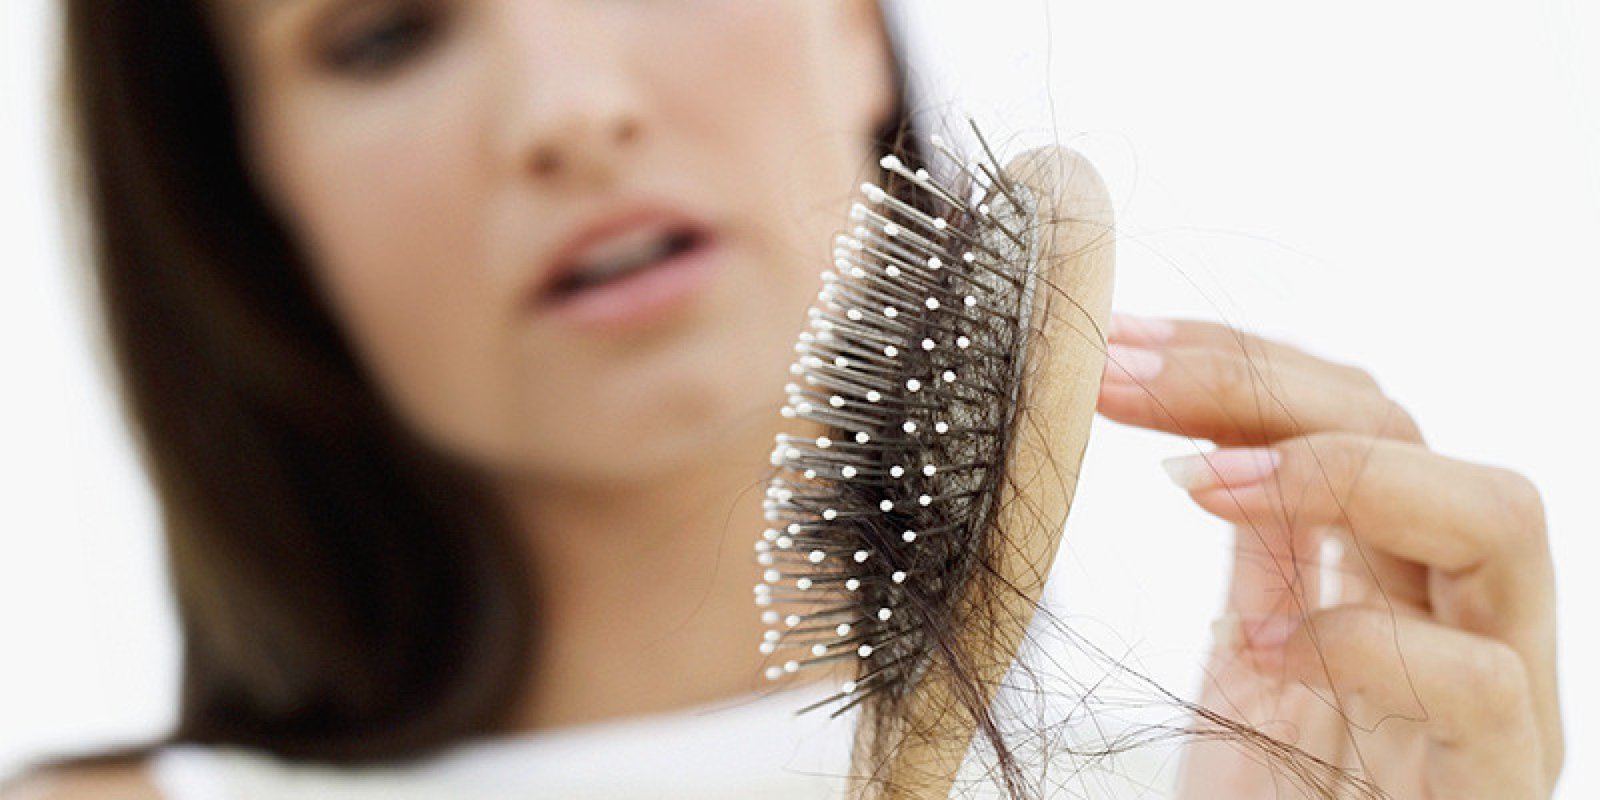 Clinical Research: Nutrafol Helps Healthy Hair Growth